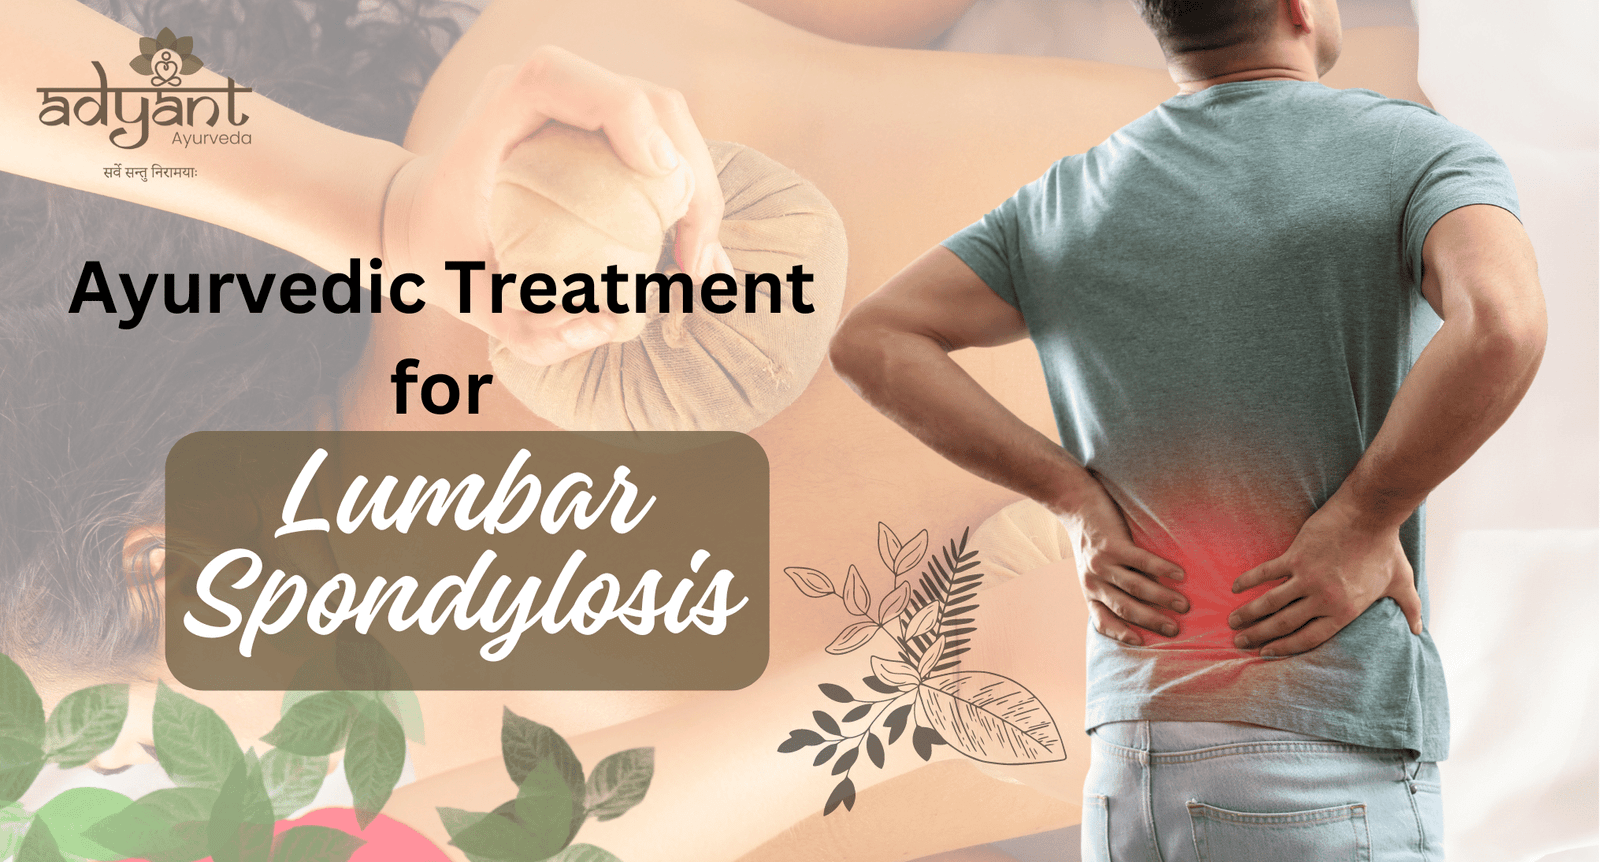 You are currently viewing Ayurvedic Treatment for Lumbar Spondylosis: Symptoms, Home Remedies & More